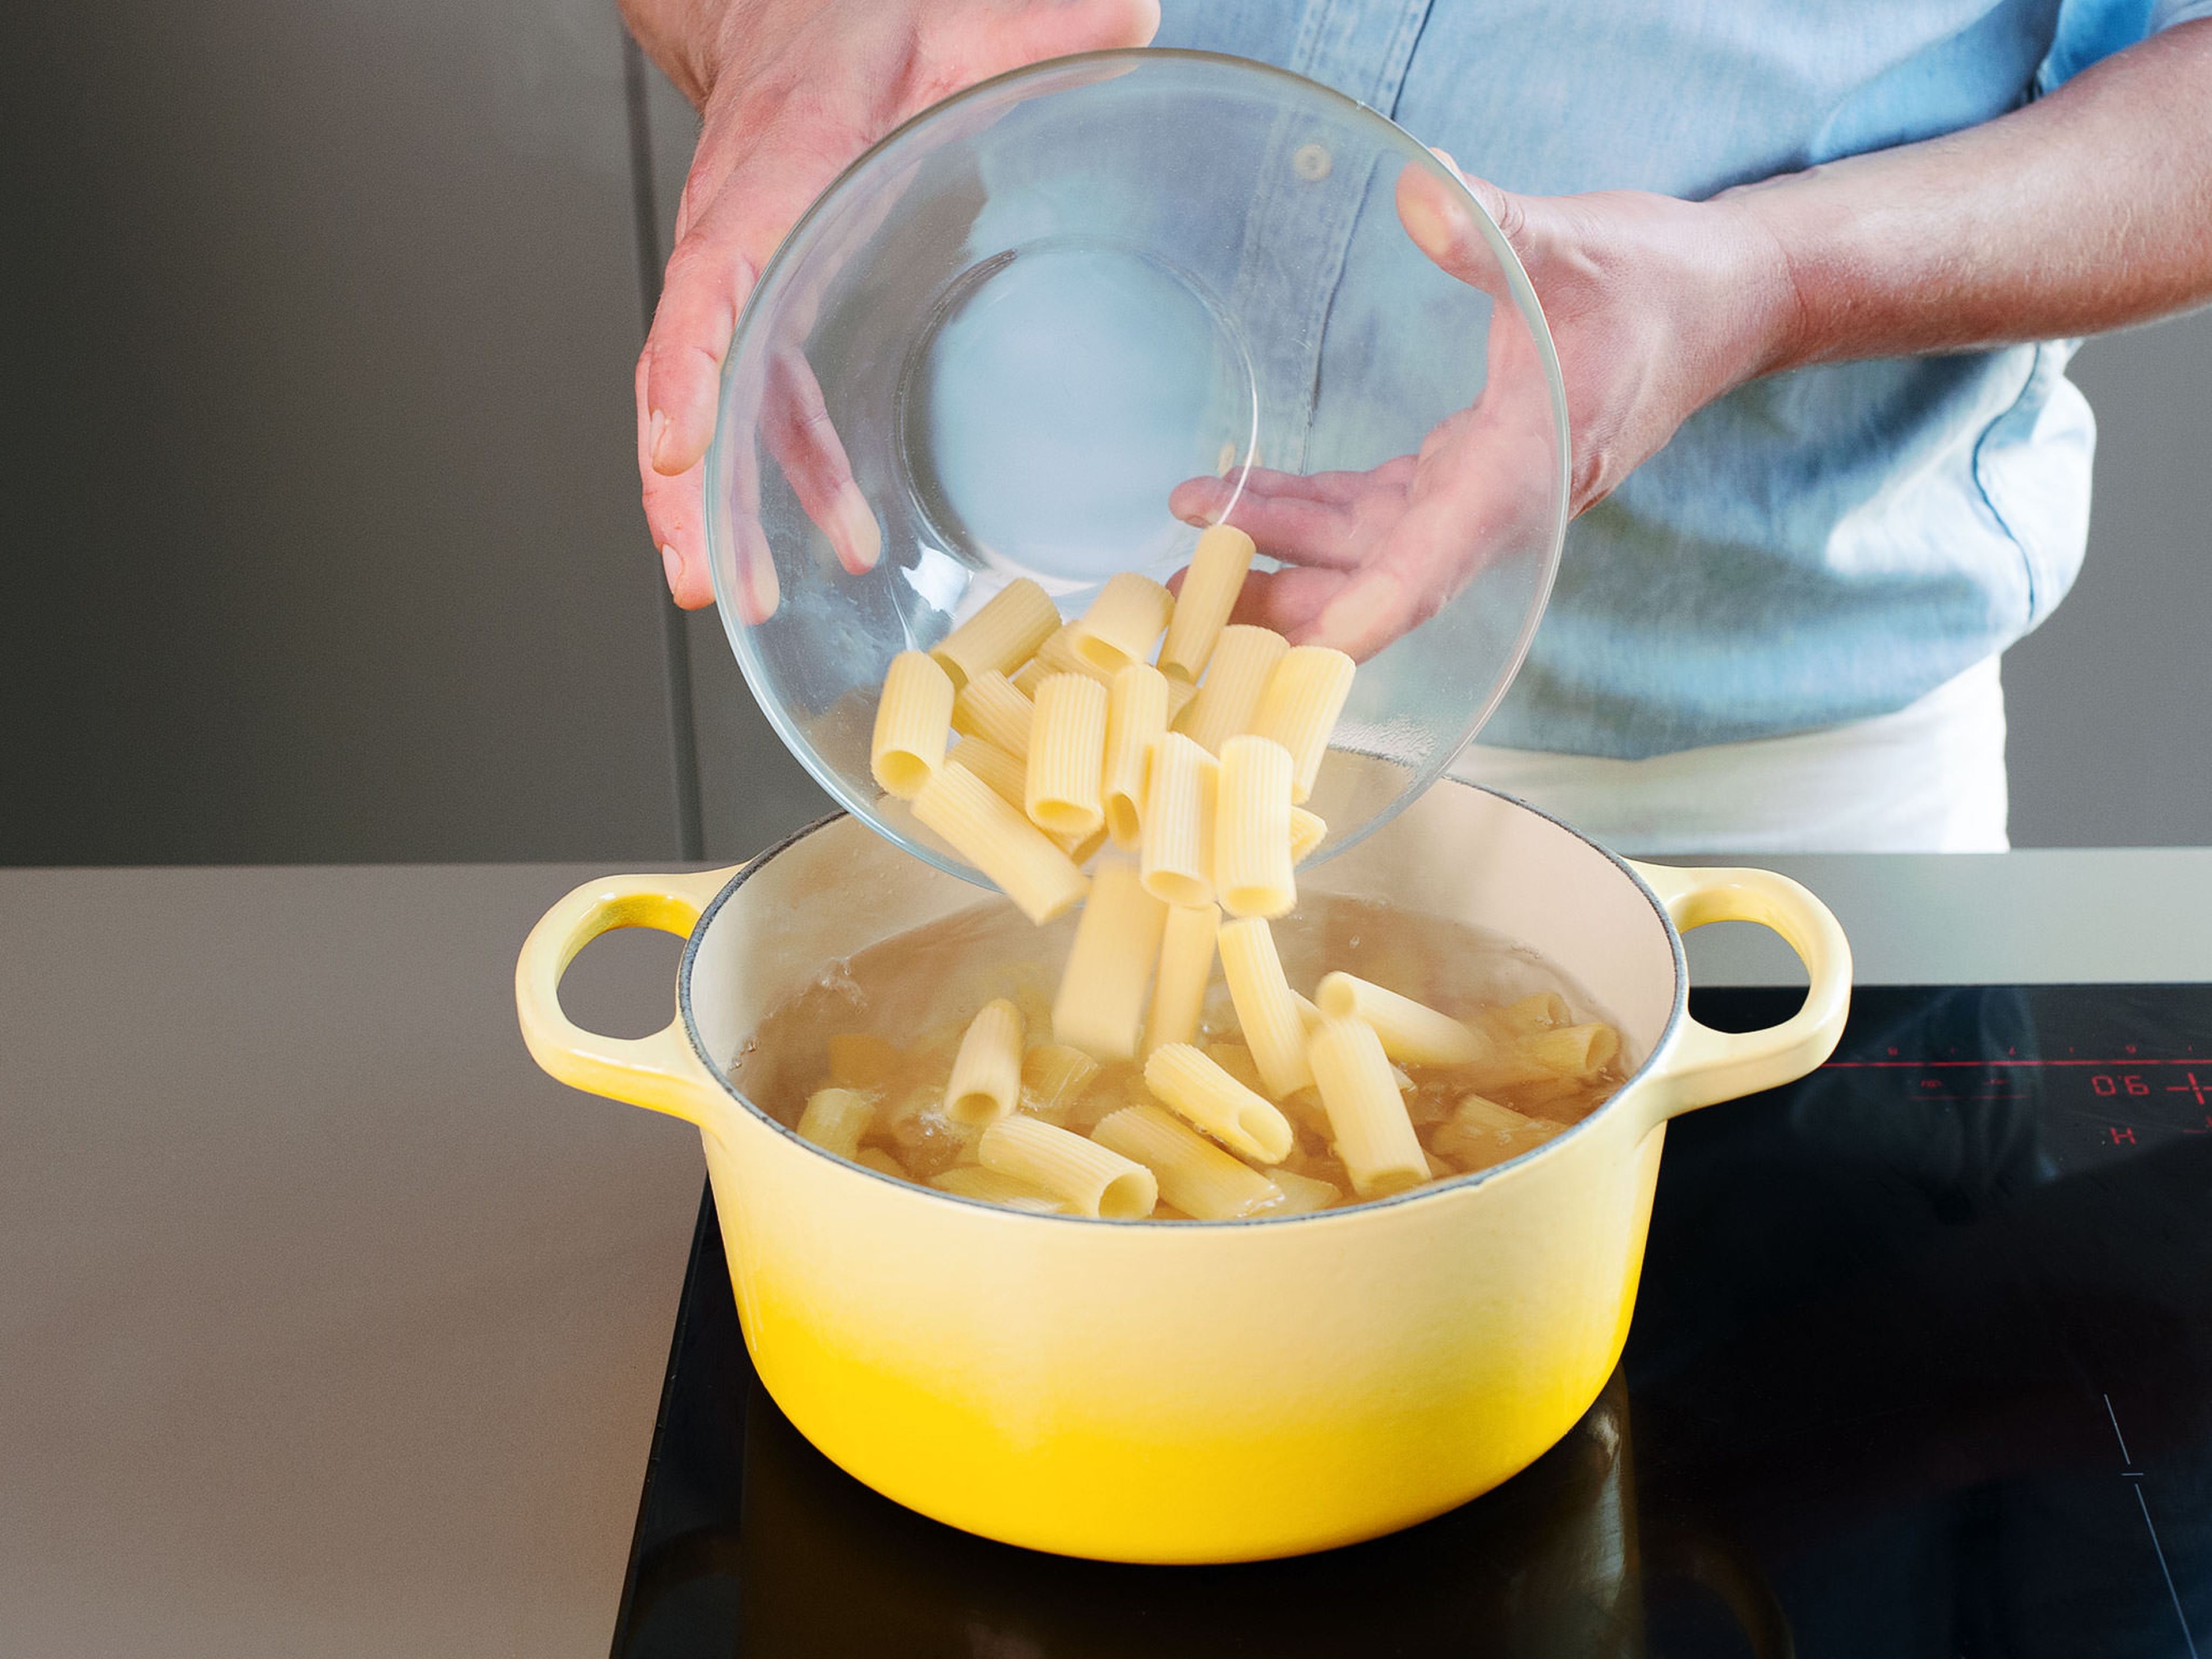 Fill a large saucepan halfway with water; bring to a boil over high heat, then add the salt. Add rigatoni and cook, according to package instructions, for approx. 10 - 12 min. until al dente. Drain pasta, reserving some of the pasta water, and set aside.